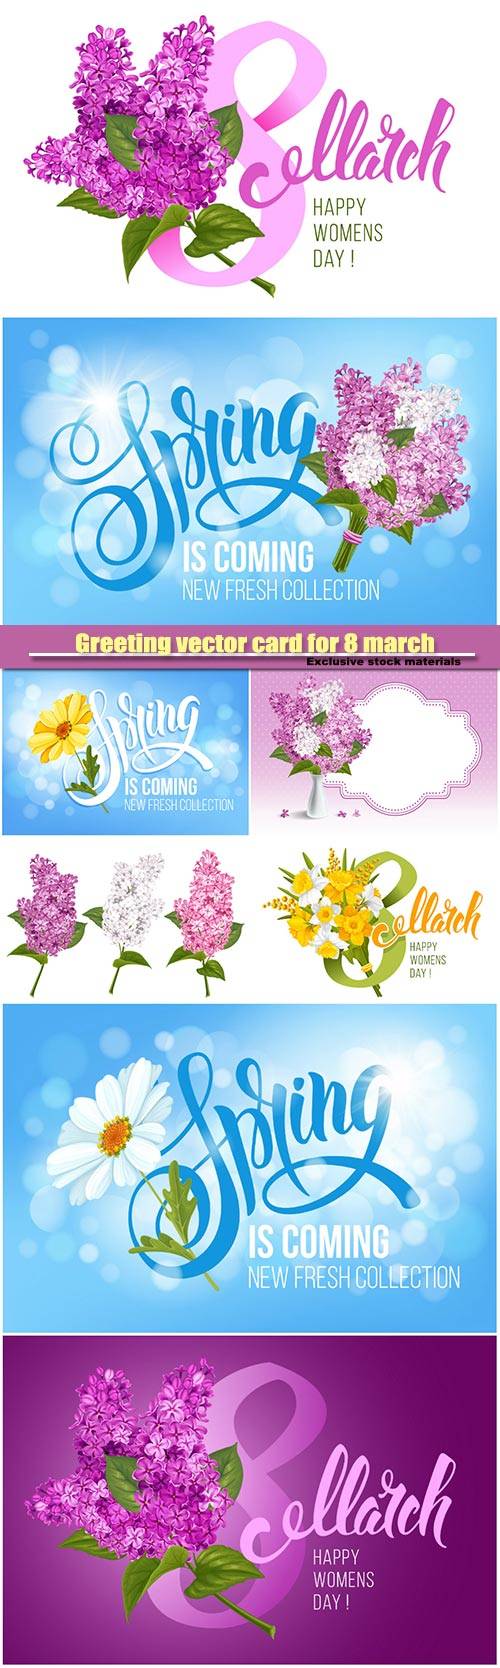 Greeting vector card for 8 march, womens day